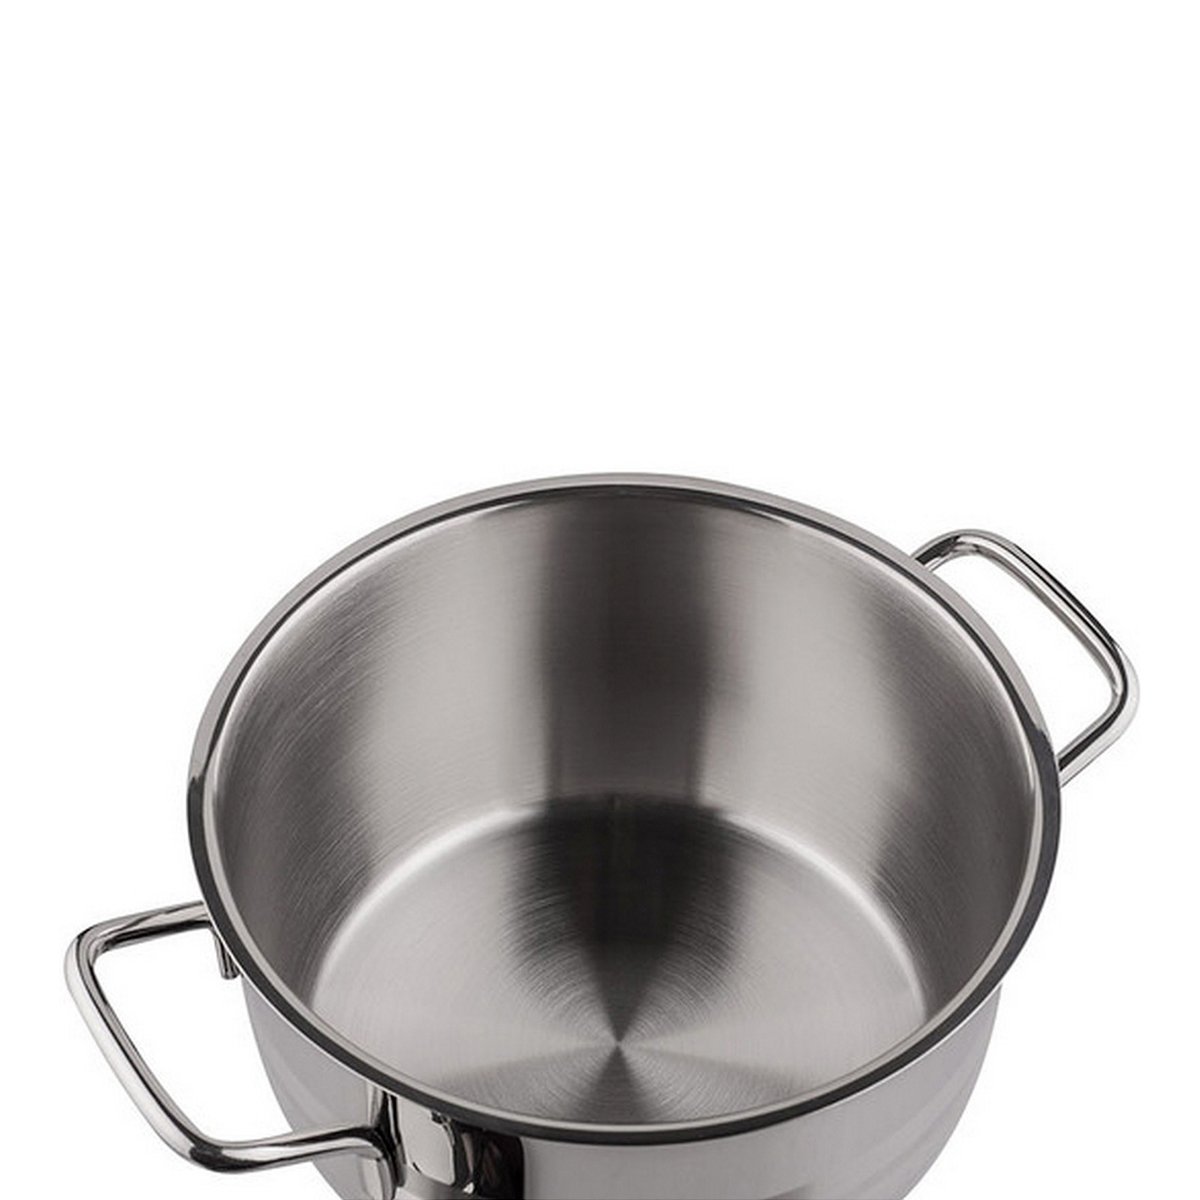 Korkmaz Stainless Steel Astra Casserole With Lid 22cm